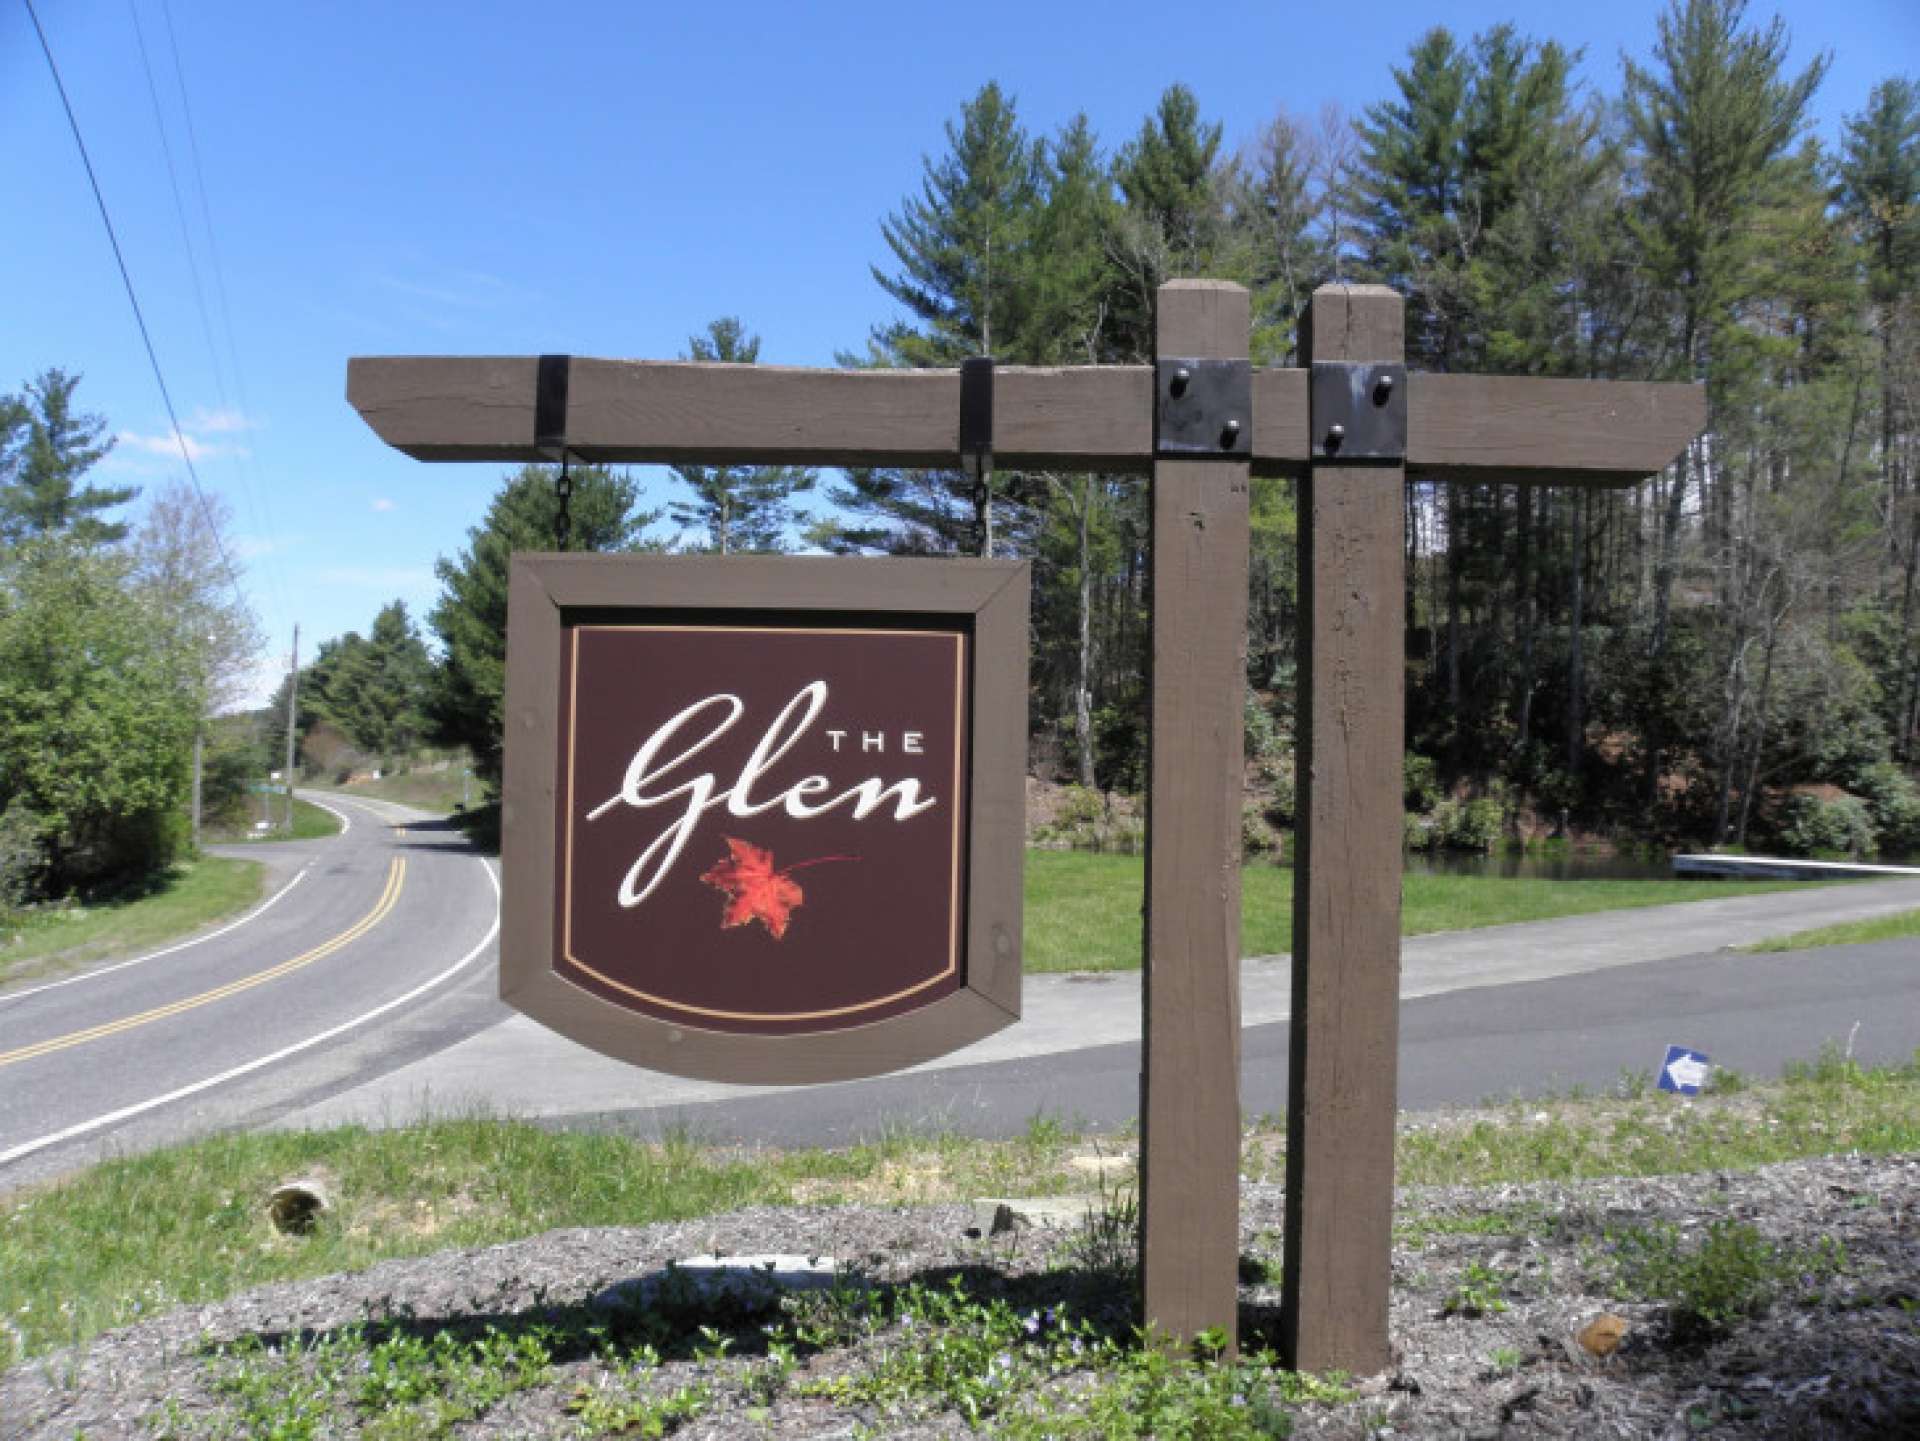 Looking for an affordable home site for your Eastern Ashe County mountain retreat?  Then take a look at these NC Mountain homesites located in The Glen at Calloway Gap.